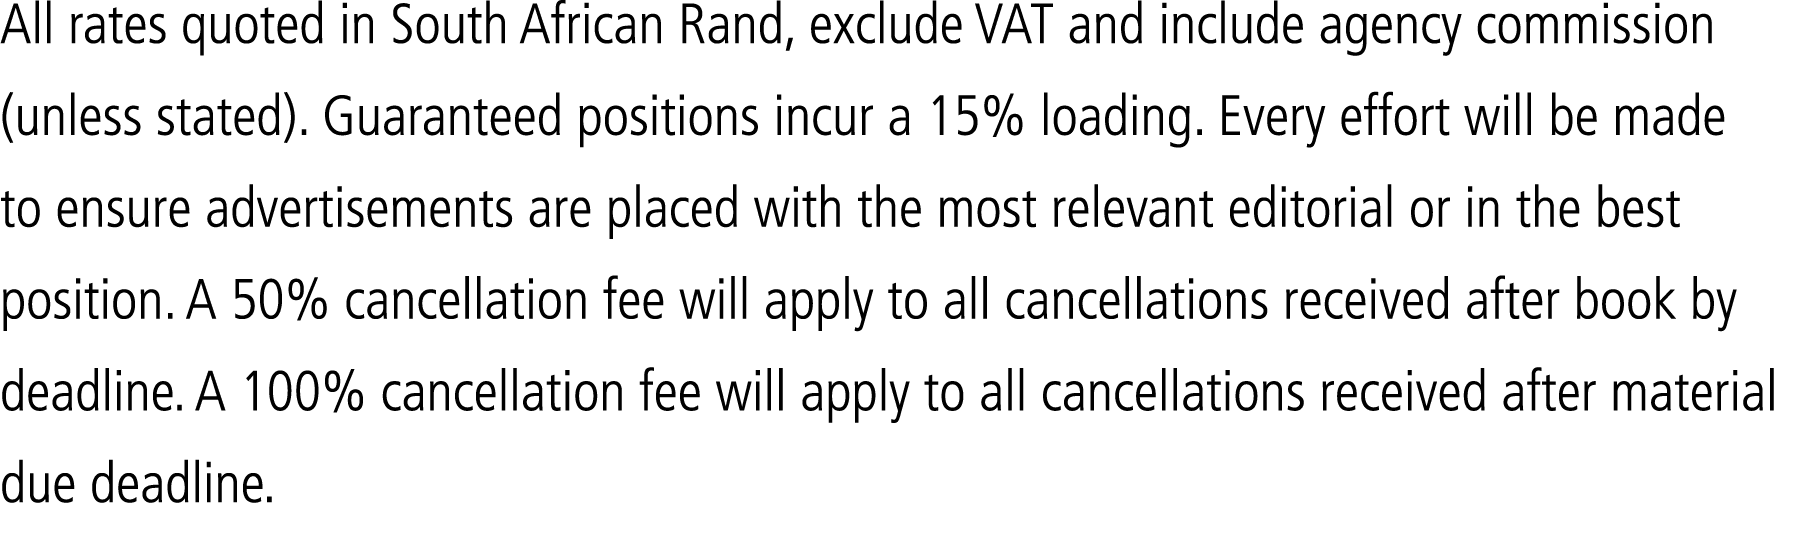 All rates quoted in South African Rand, exclude VAT and include agency commission (unless stated). Guaranteed positio...